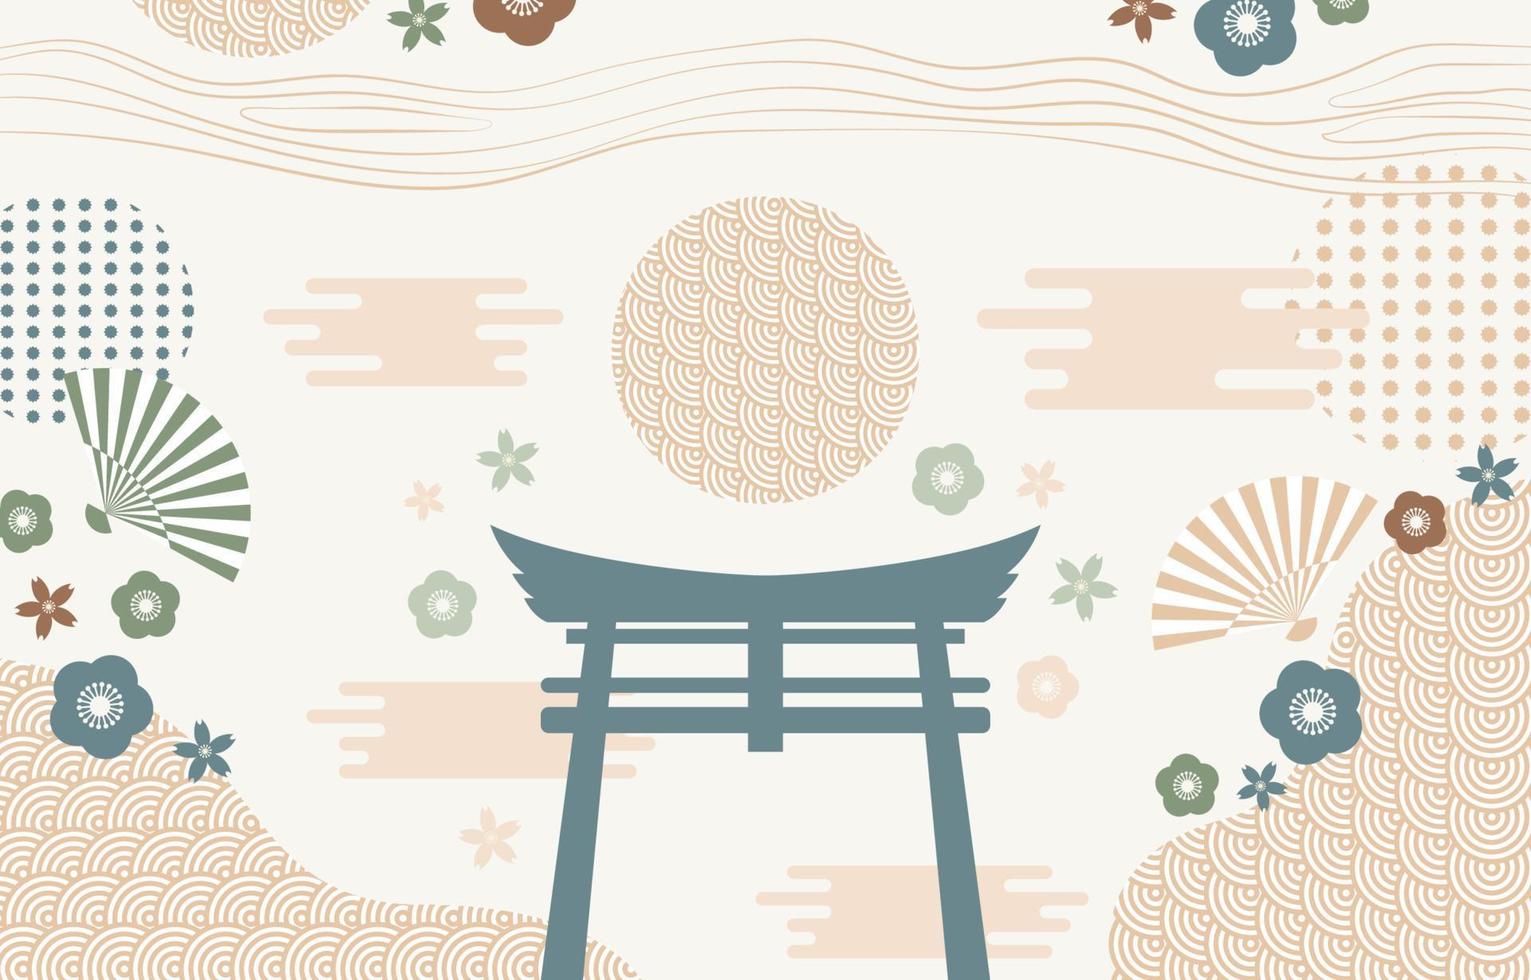 Japanese Background with Flower, Wave, Cloud and Abstract Elements vector